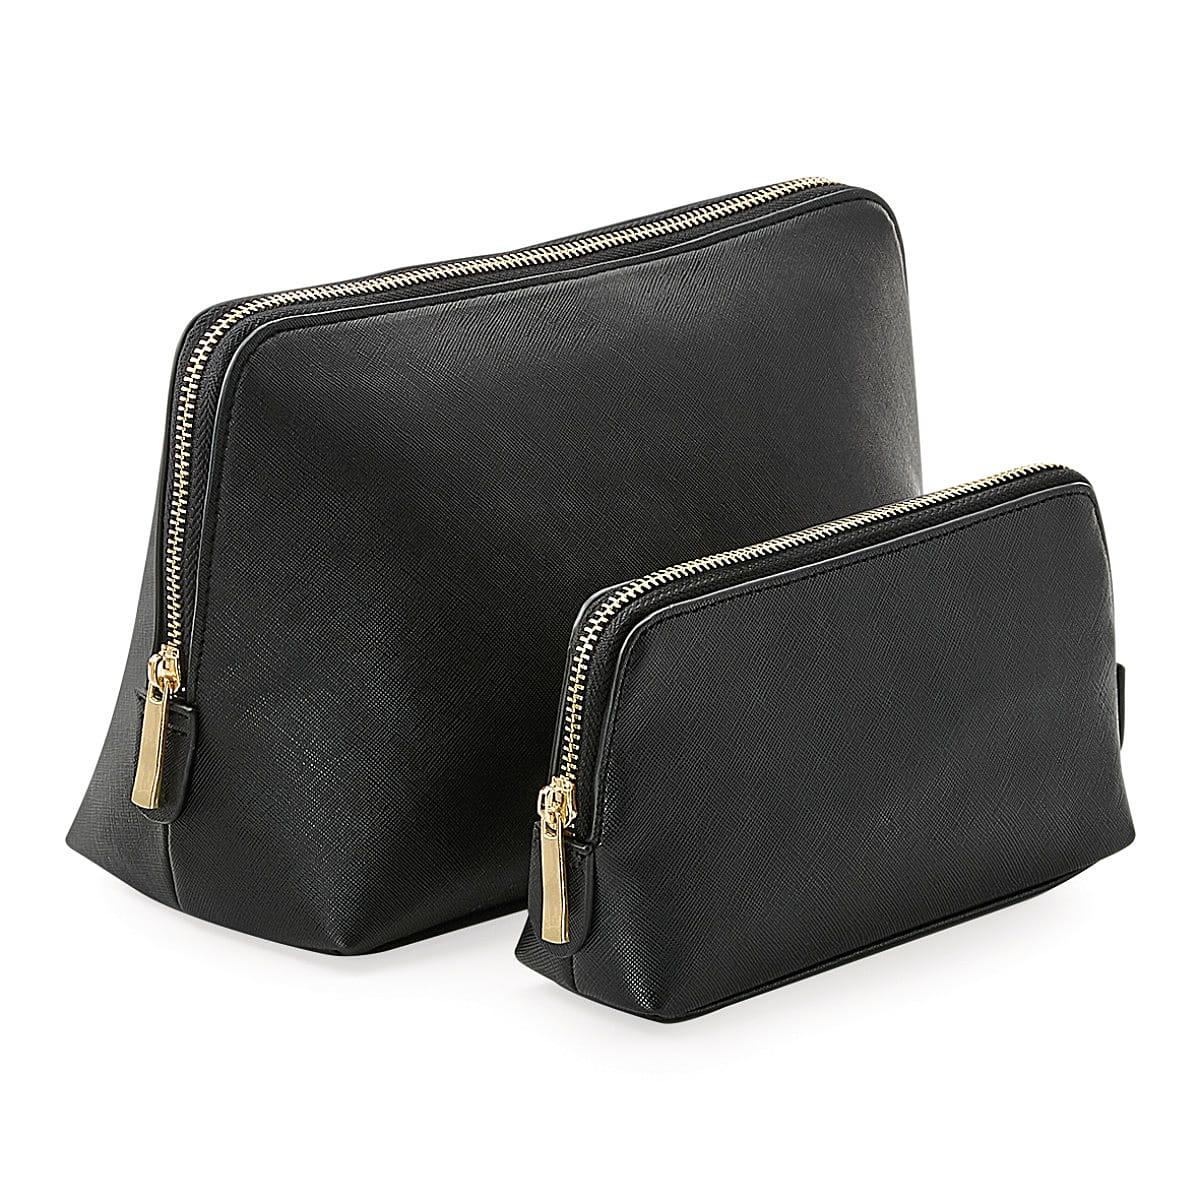 Bagbase Boutique Accessory Case in Black (Product Code: BG751)